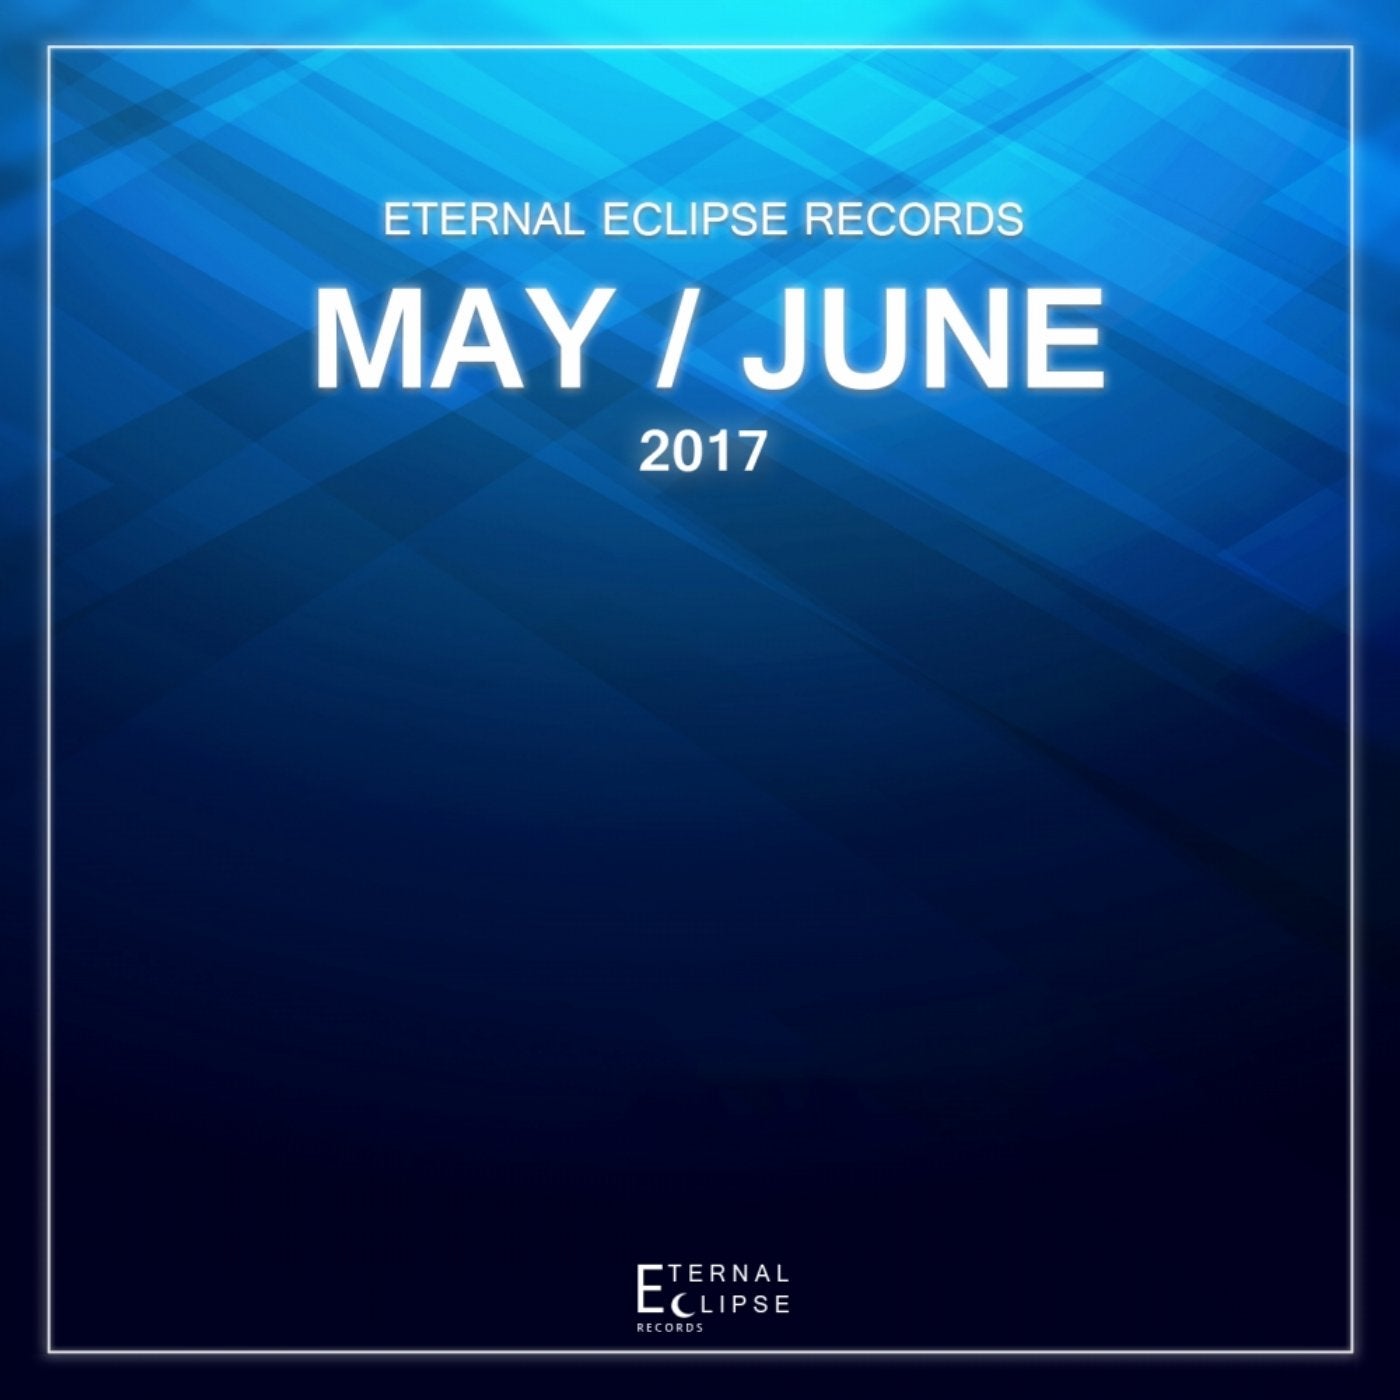 Eternal Eclipse Records May / June 2017